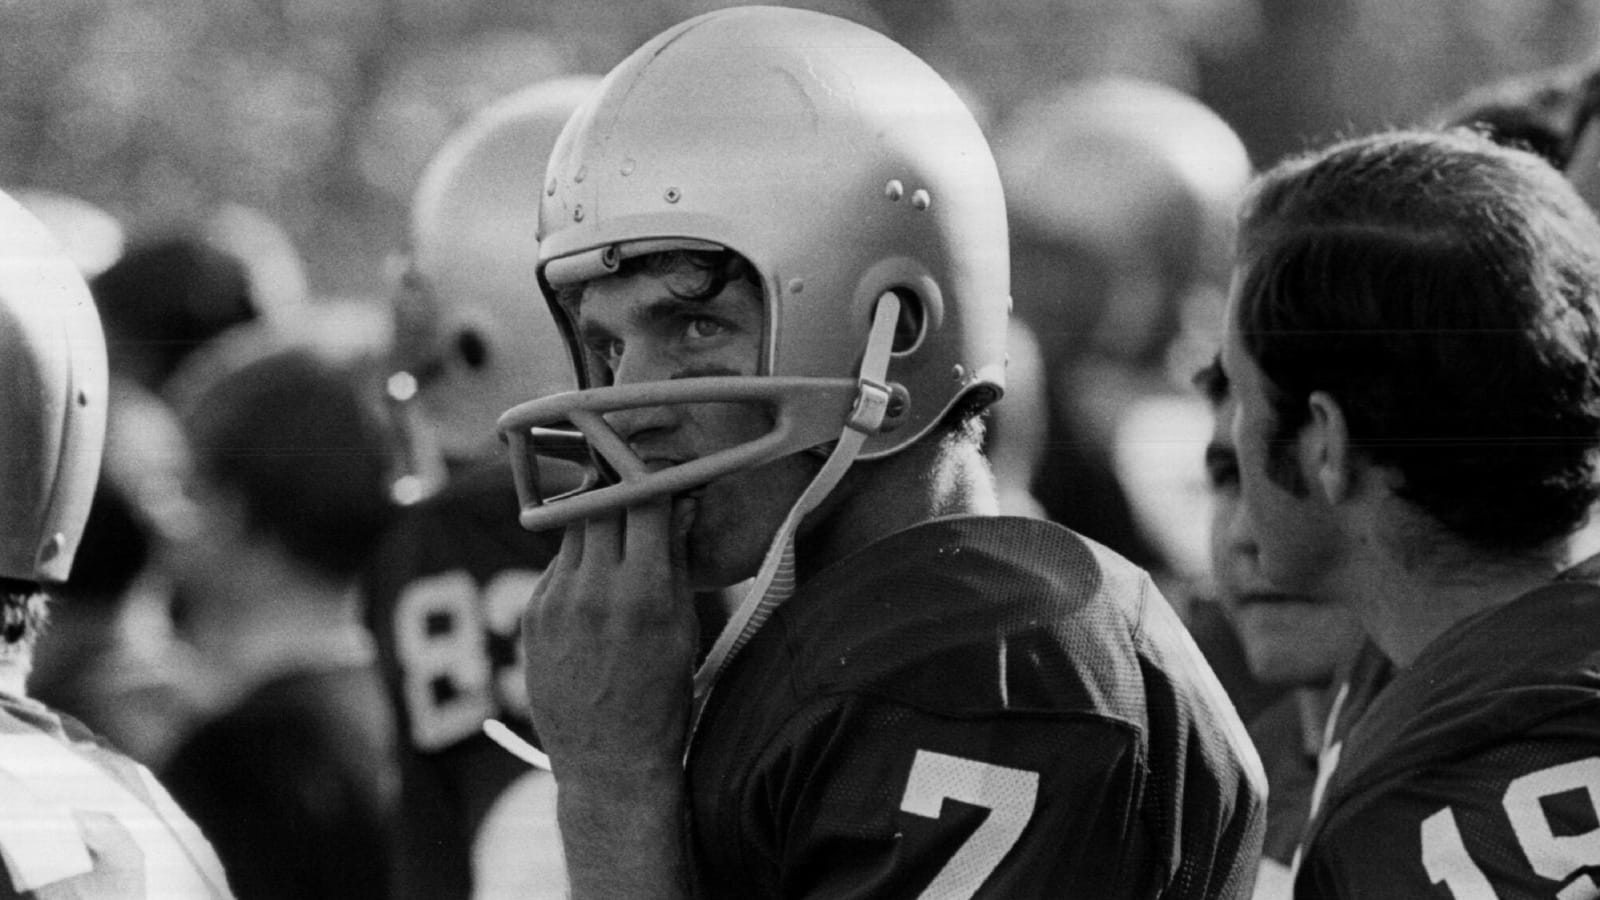 The 25 best players in Notre Dame football history